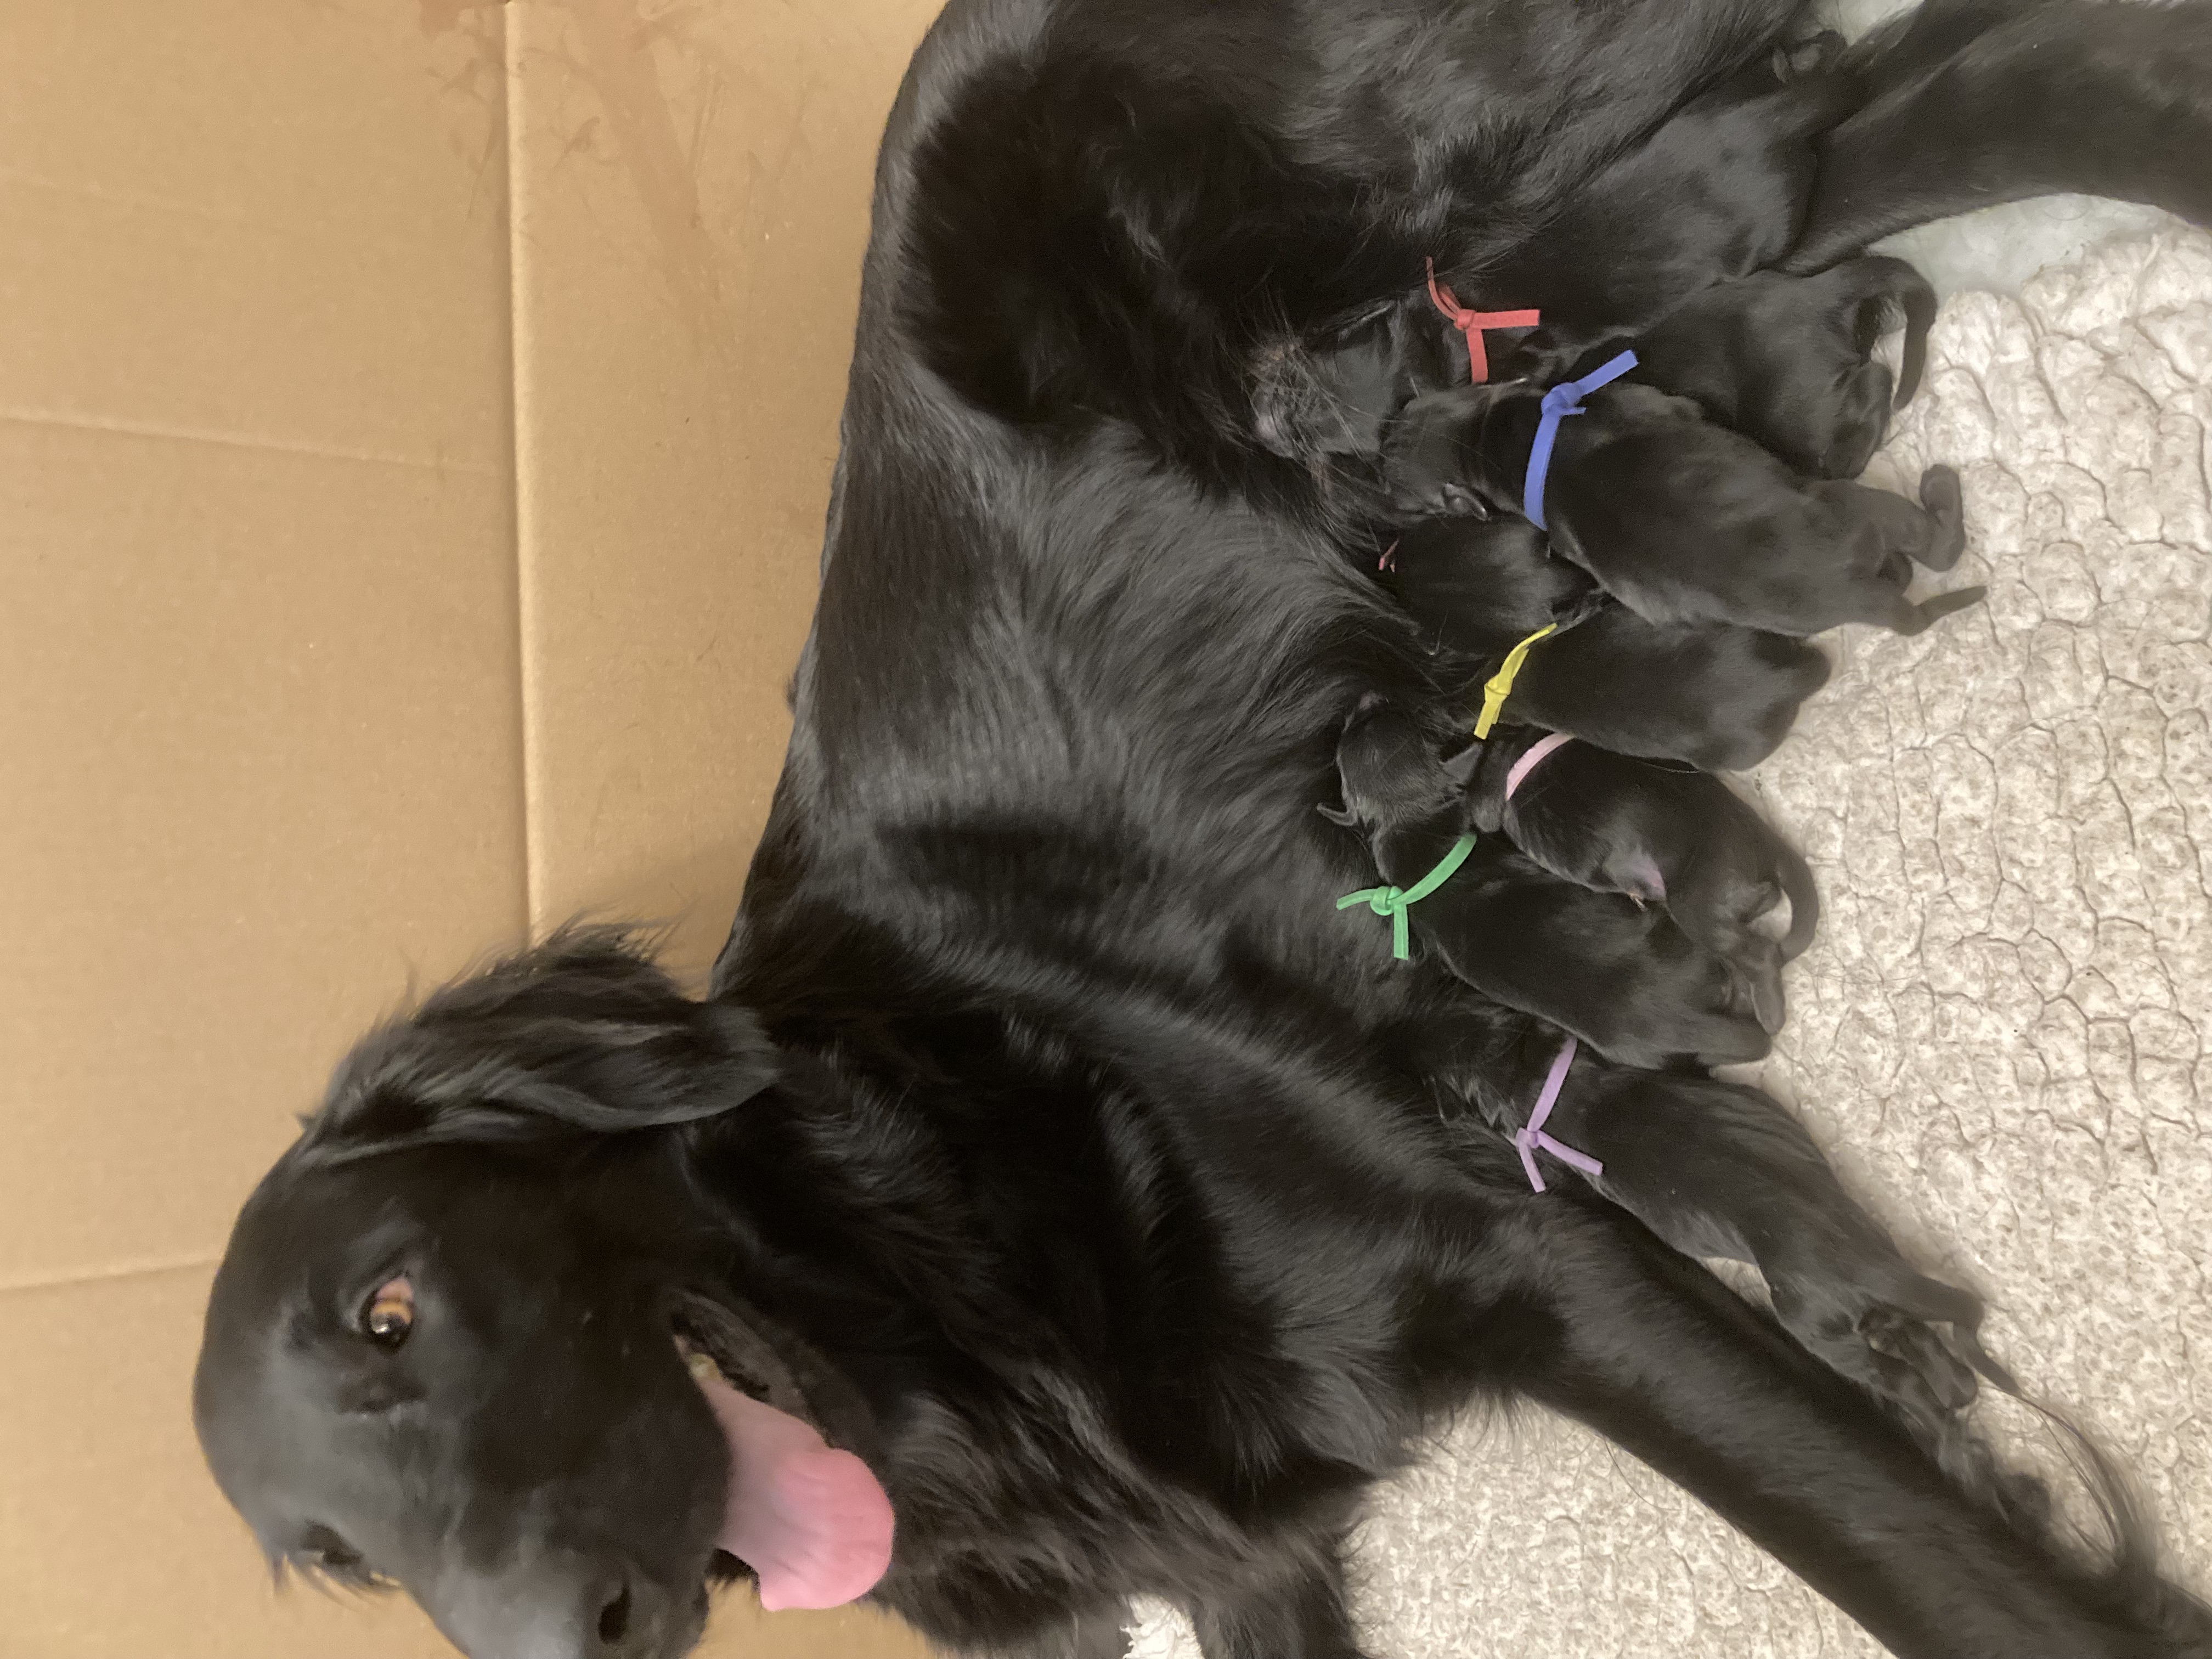 Pebbles and her pups